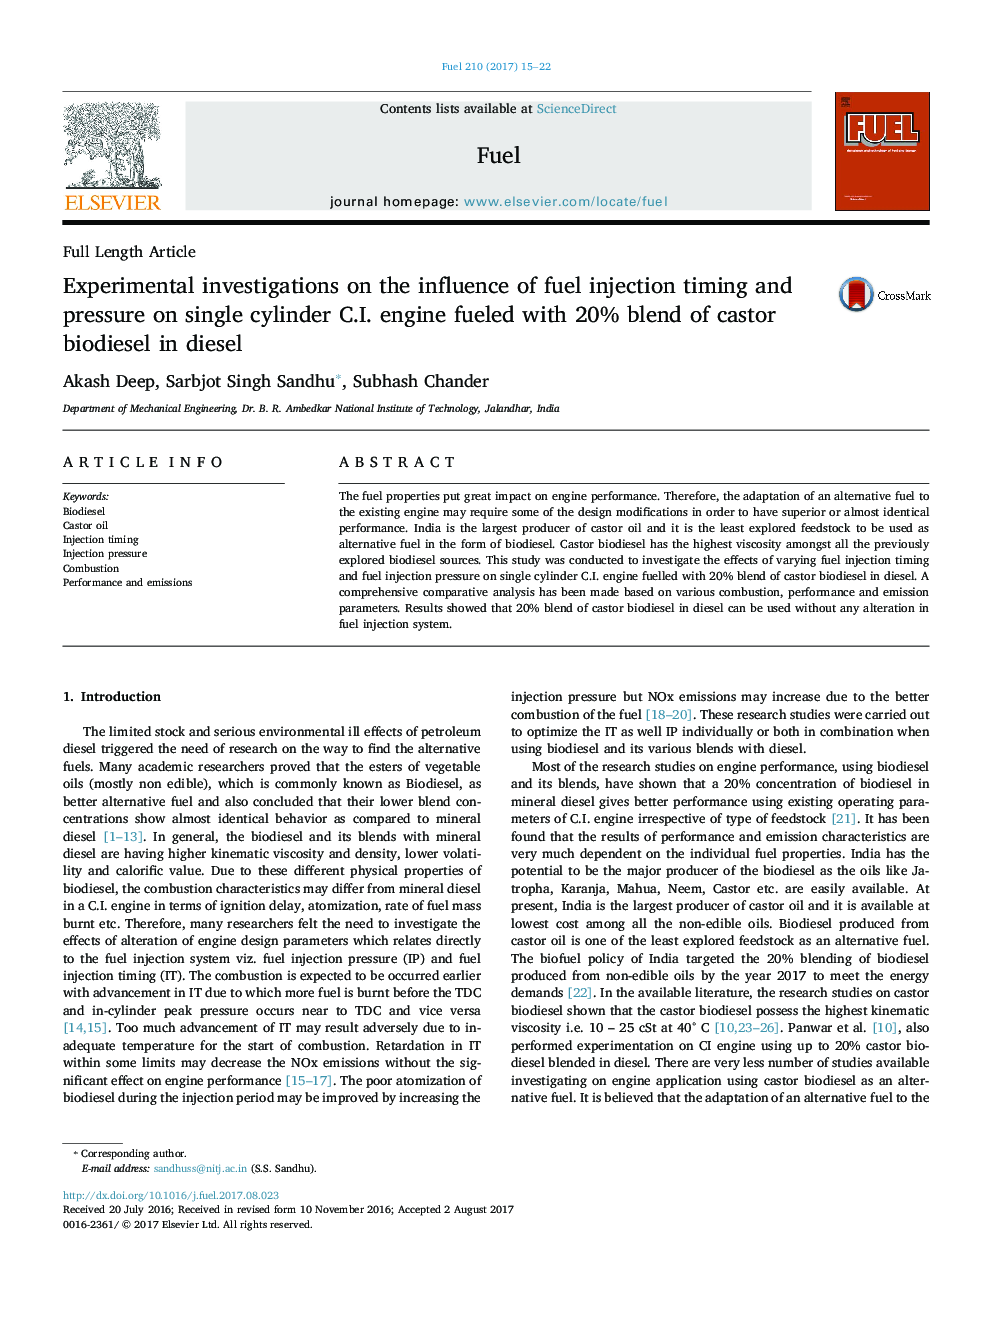 Experimental investigations on the influence of fuel injection timing and pressure on single cylinder C.I. engine fueled with 20% blend of castor biodiesel in diesel